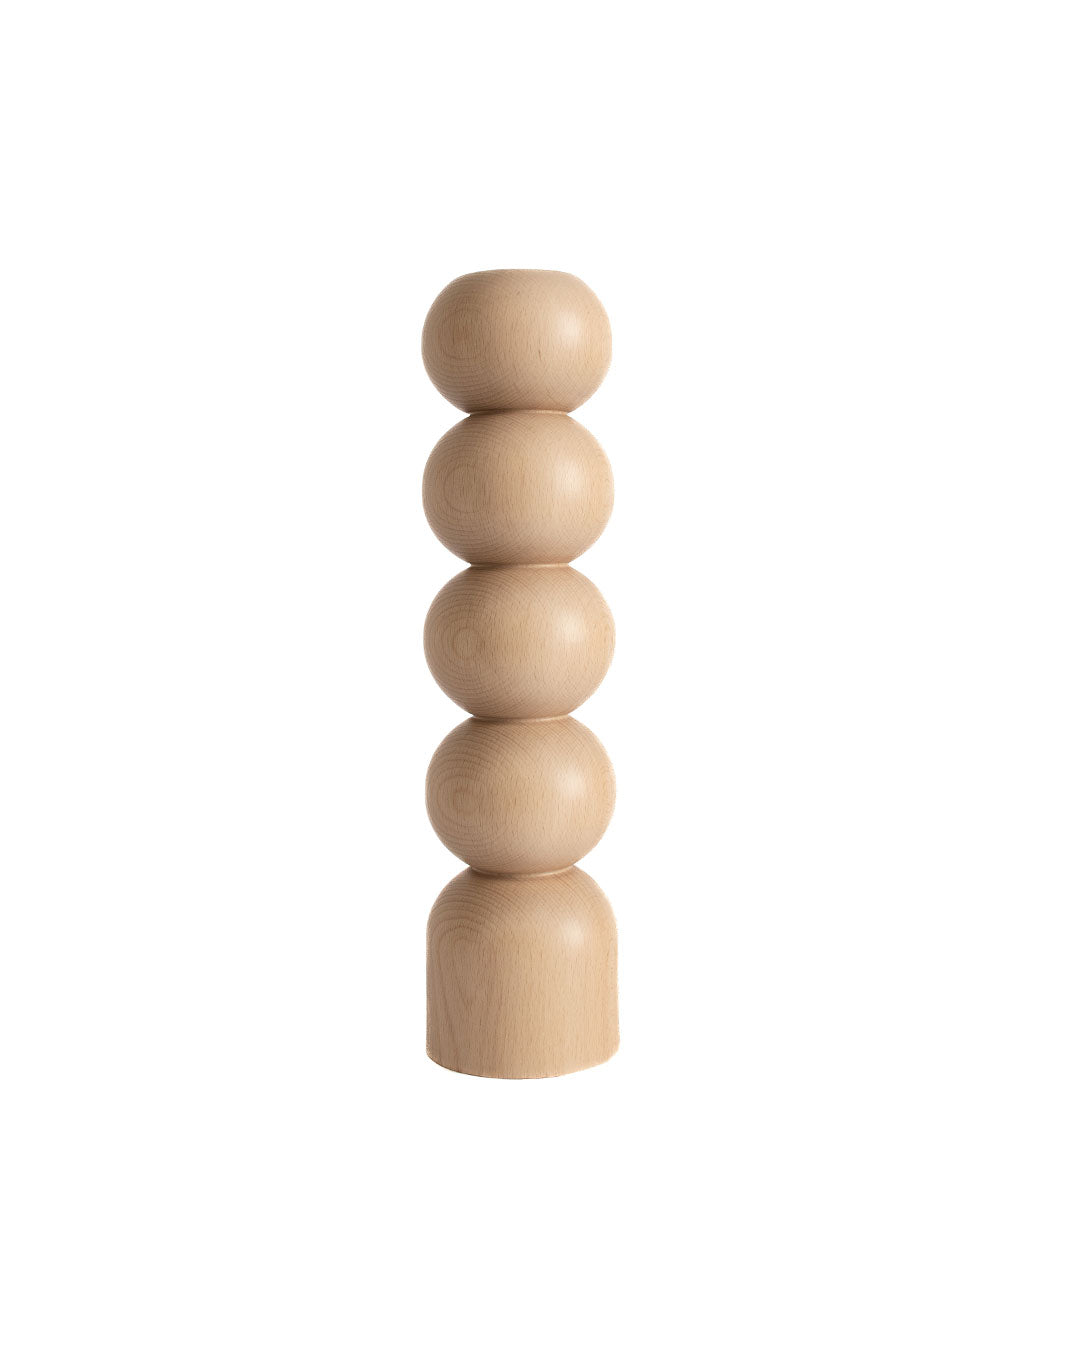 Candleholder-3-in-1-high natural